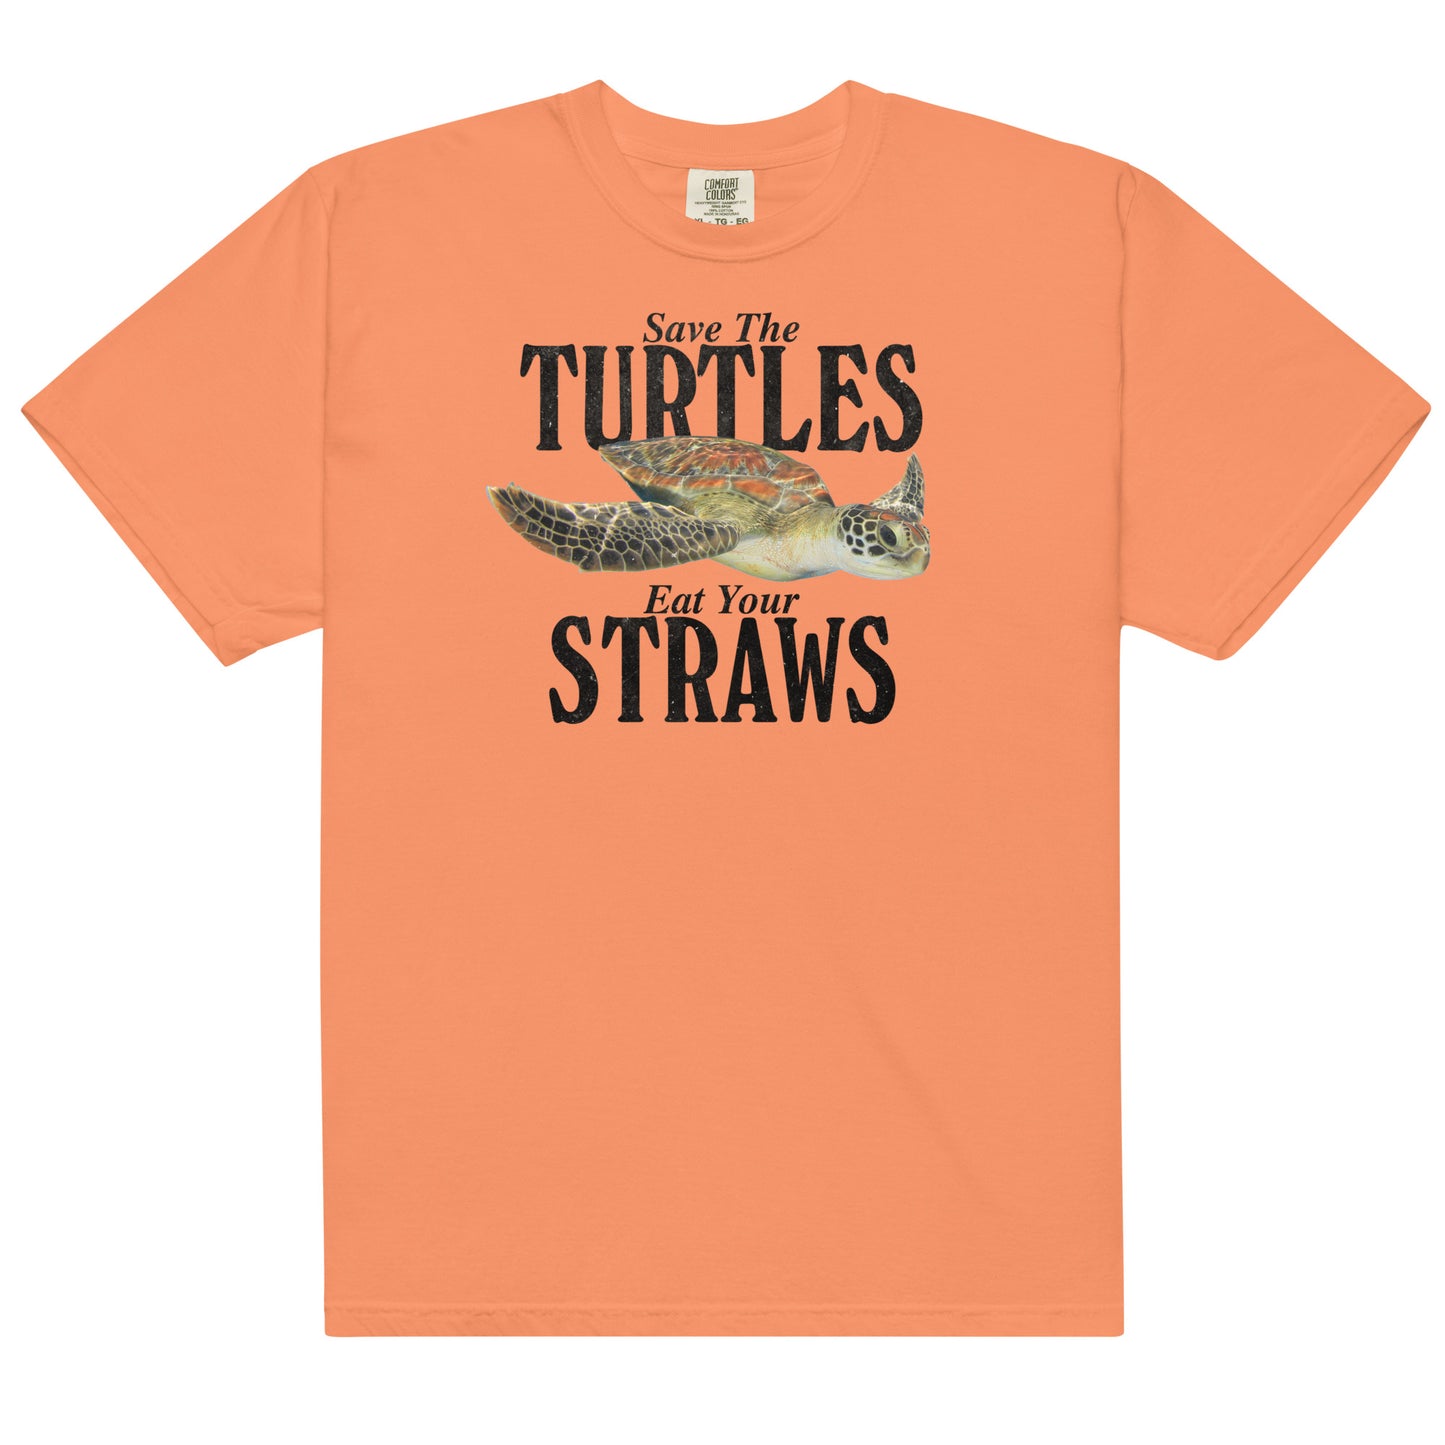 Save the Turtles Eat Your Straws Unisex t-shirt